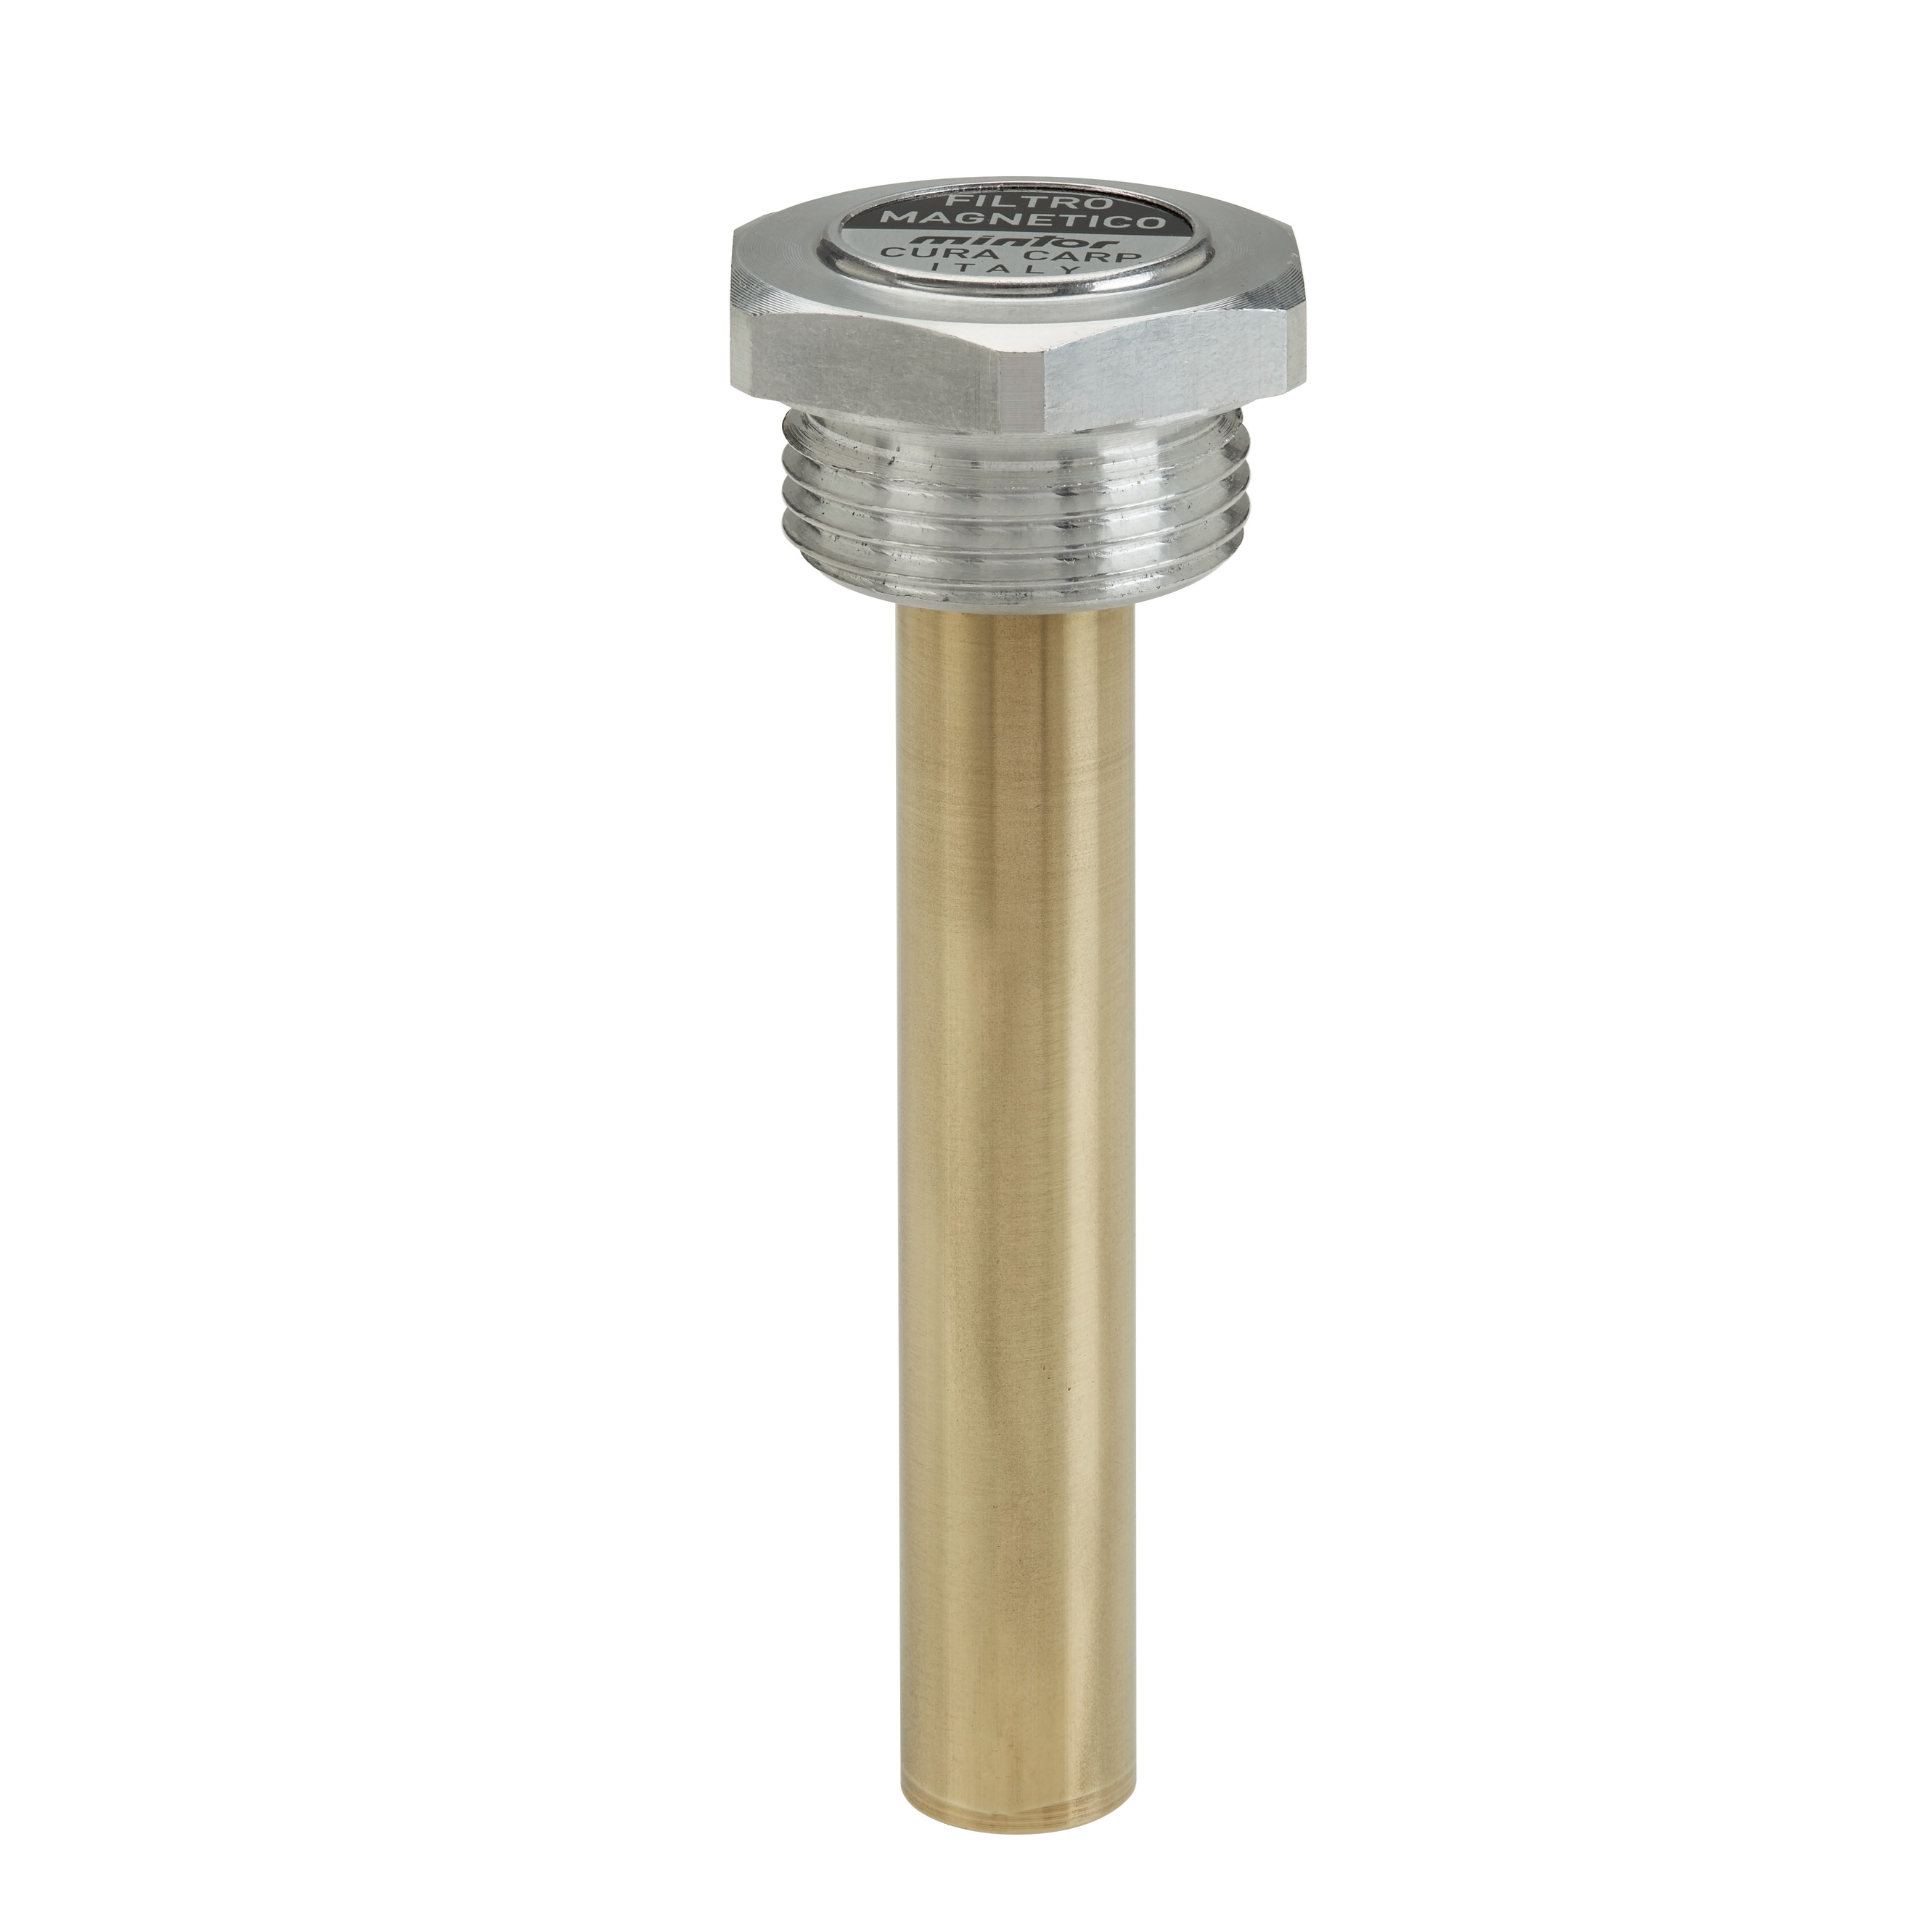 Hydraulic magnetic filter rod, 2" BSP